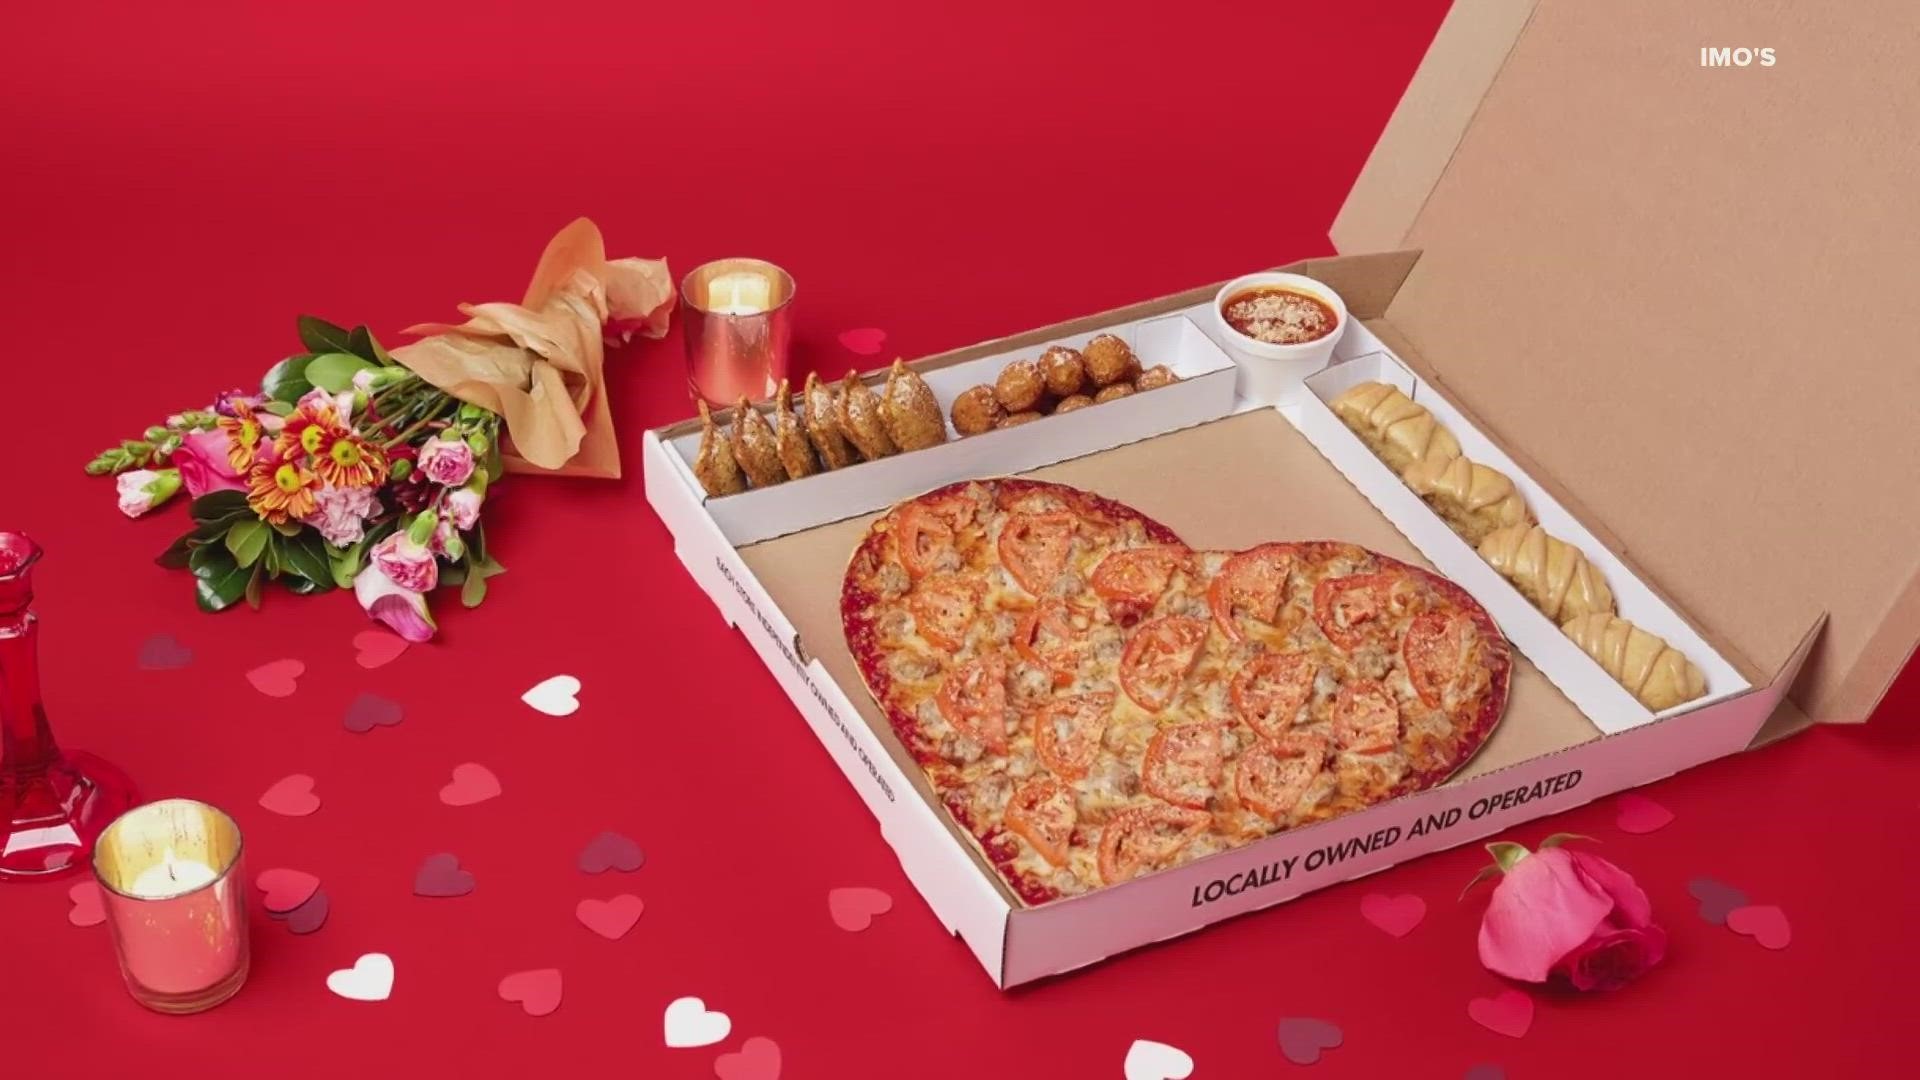 The box includes a heart-shaped pizza, toasted ravioli, provel bites and cinnimos for $10 more.